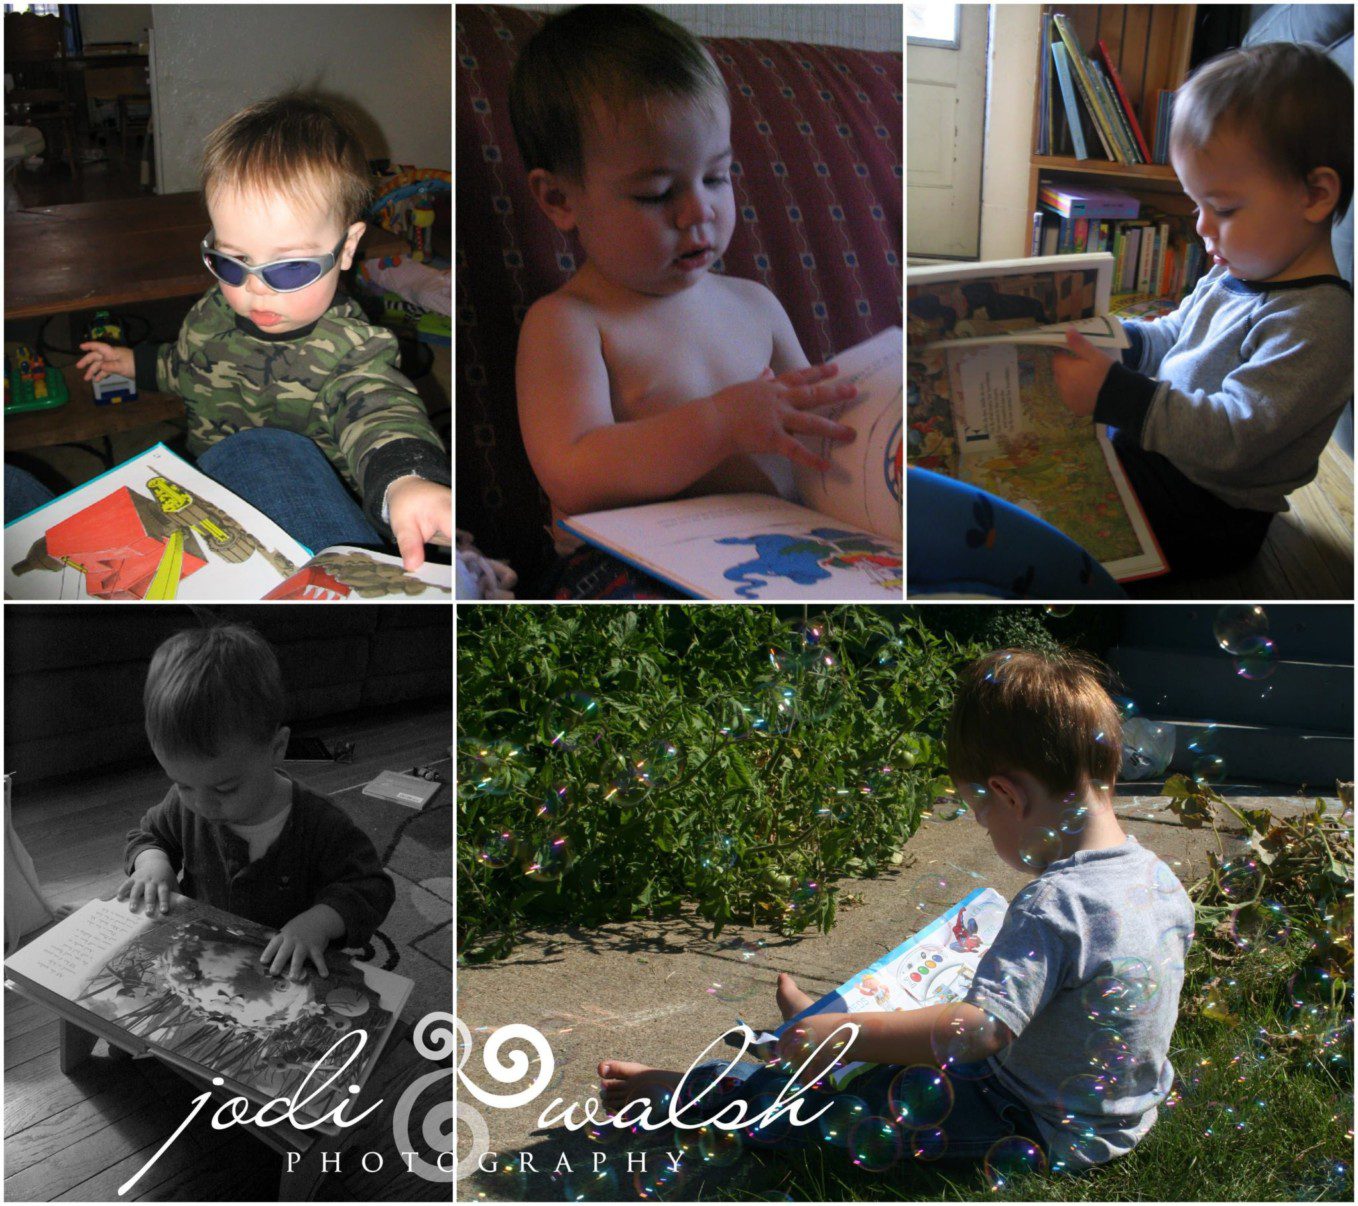 collage of images of a little boy reading books